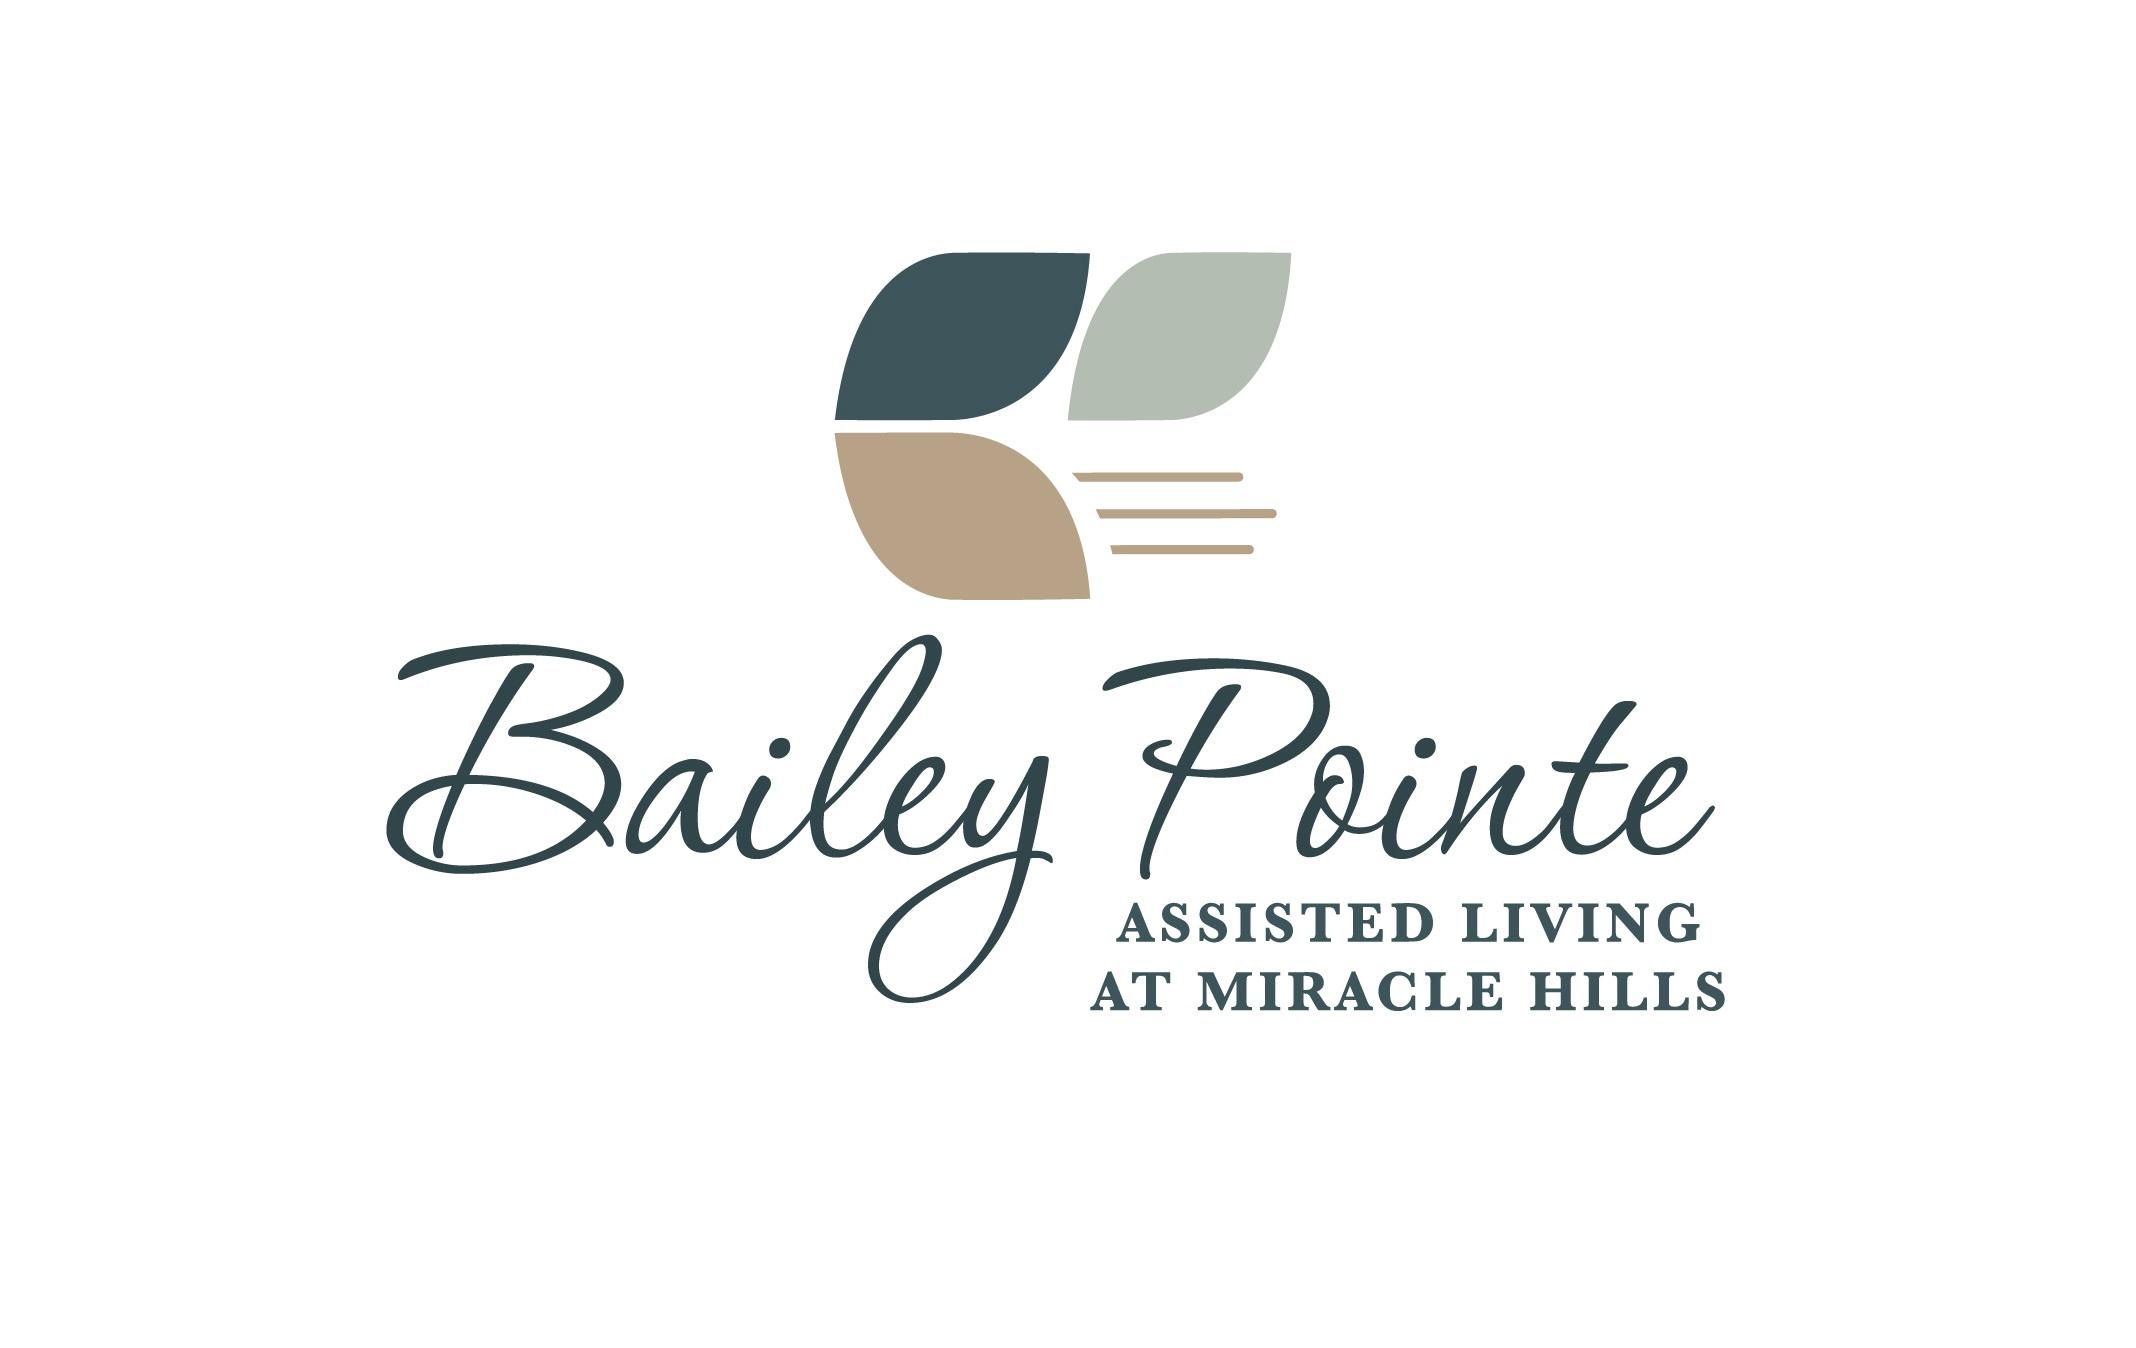 Image of Bailey Pointe Assisted Living at Miracle Hills